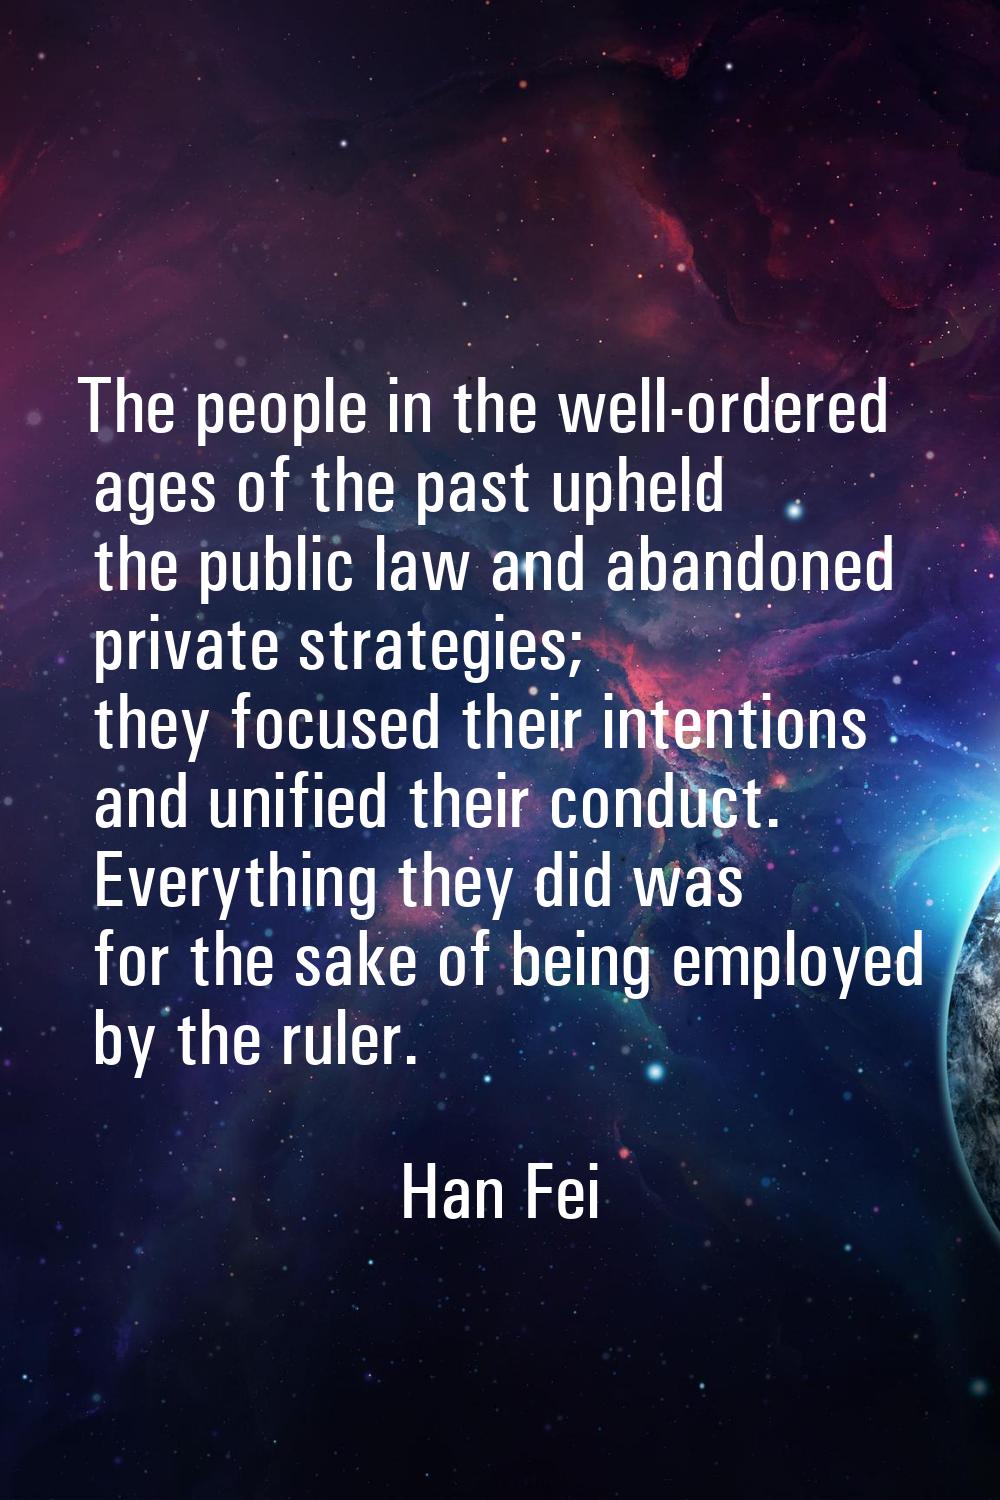 The people in the well-ordered ages of the past upheld the public law and abandoned private strateg